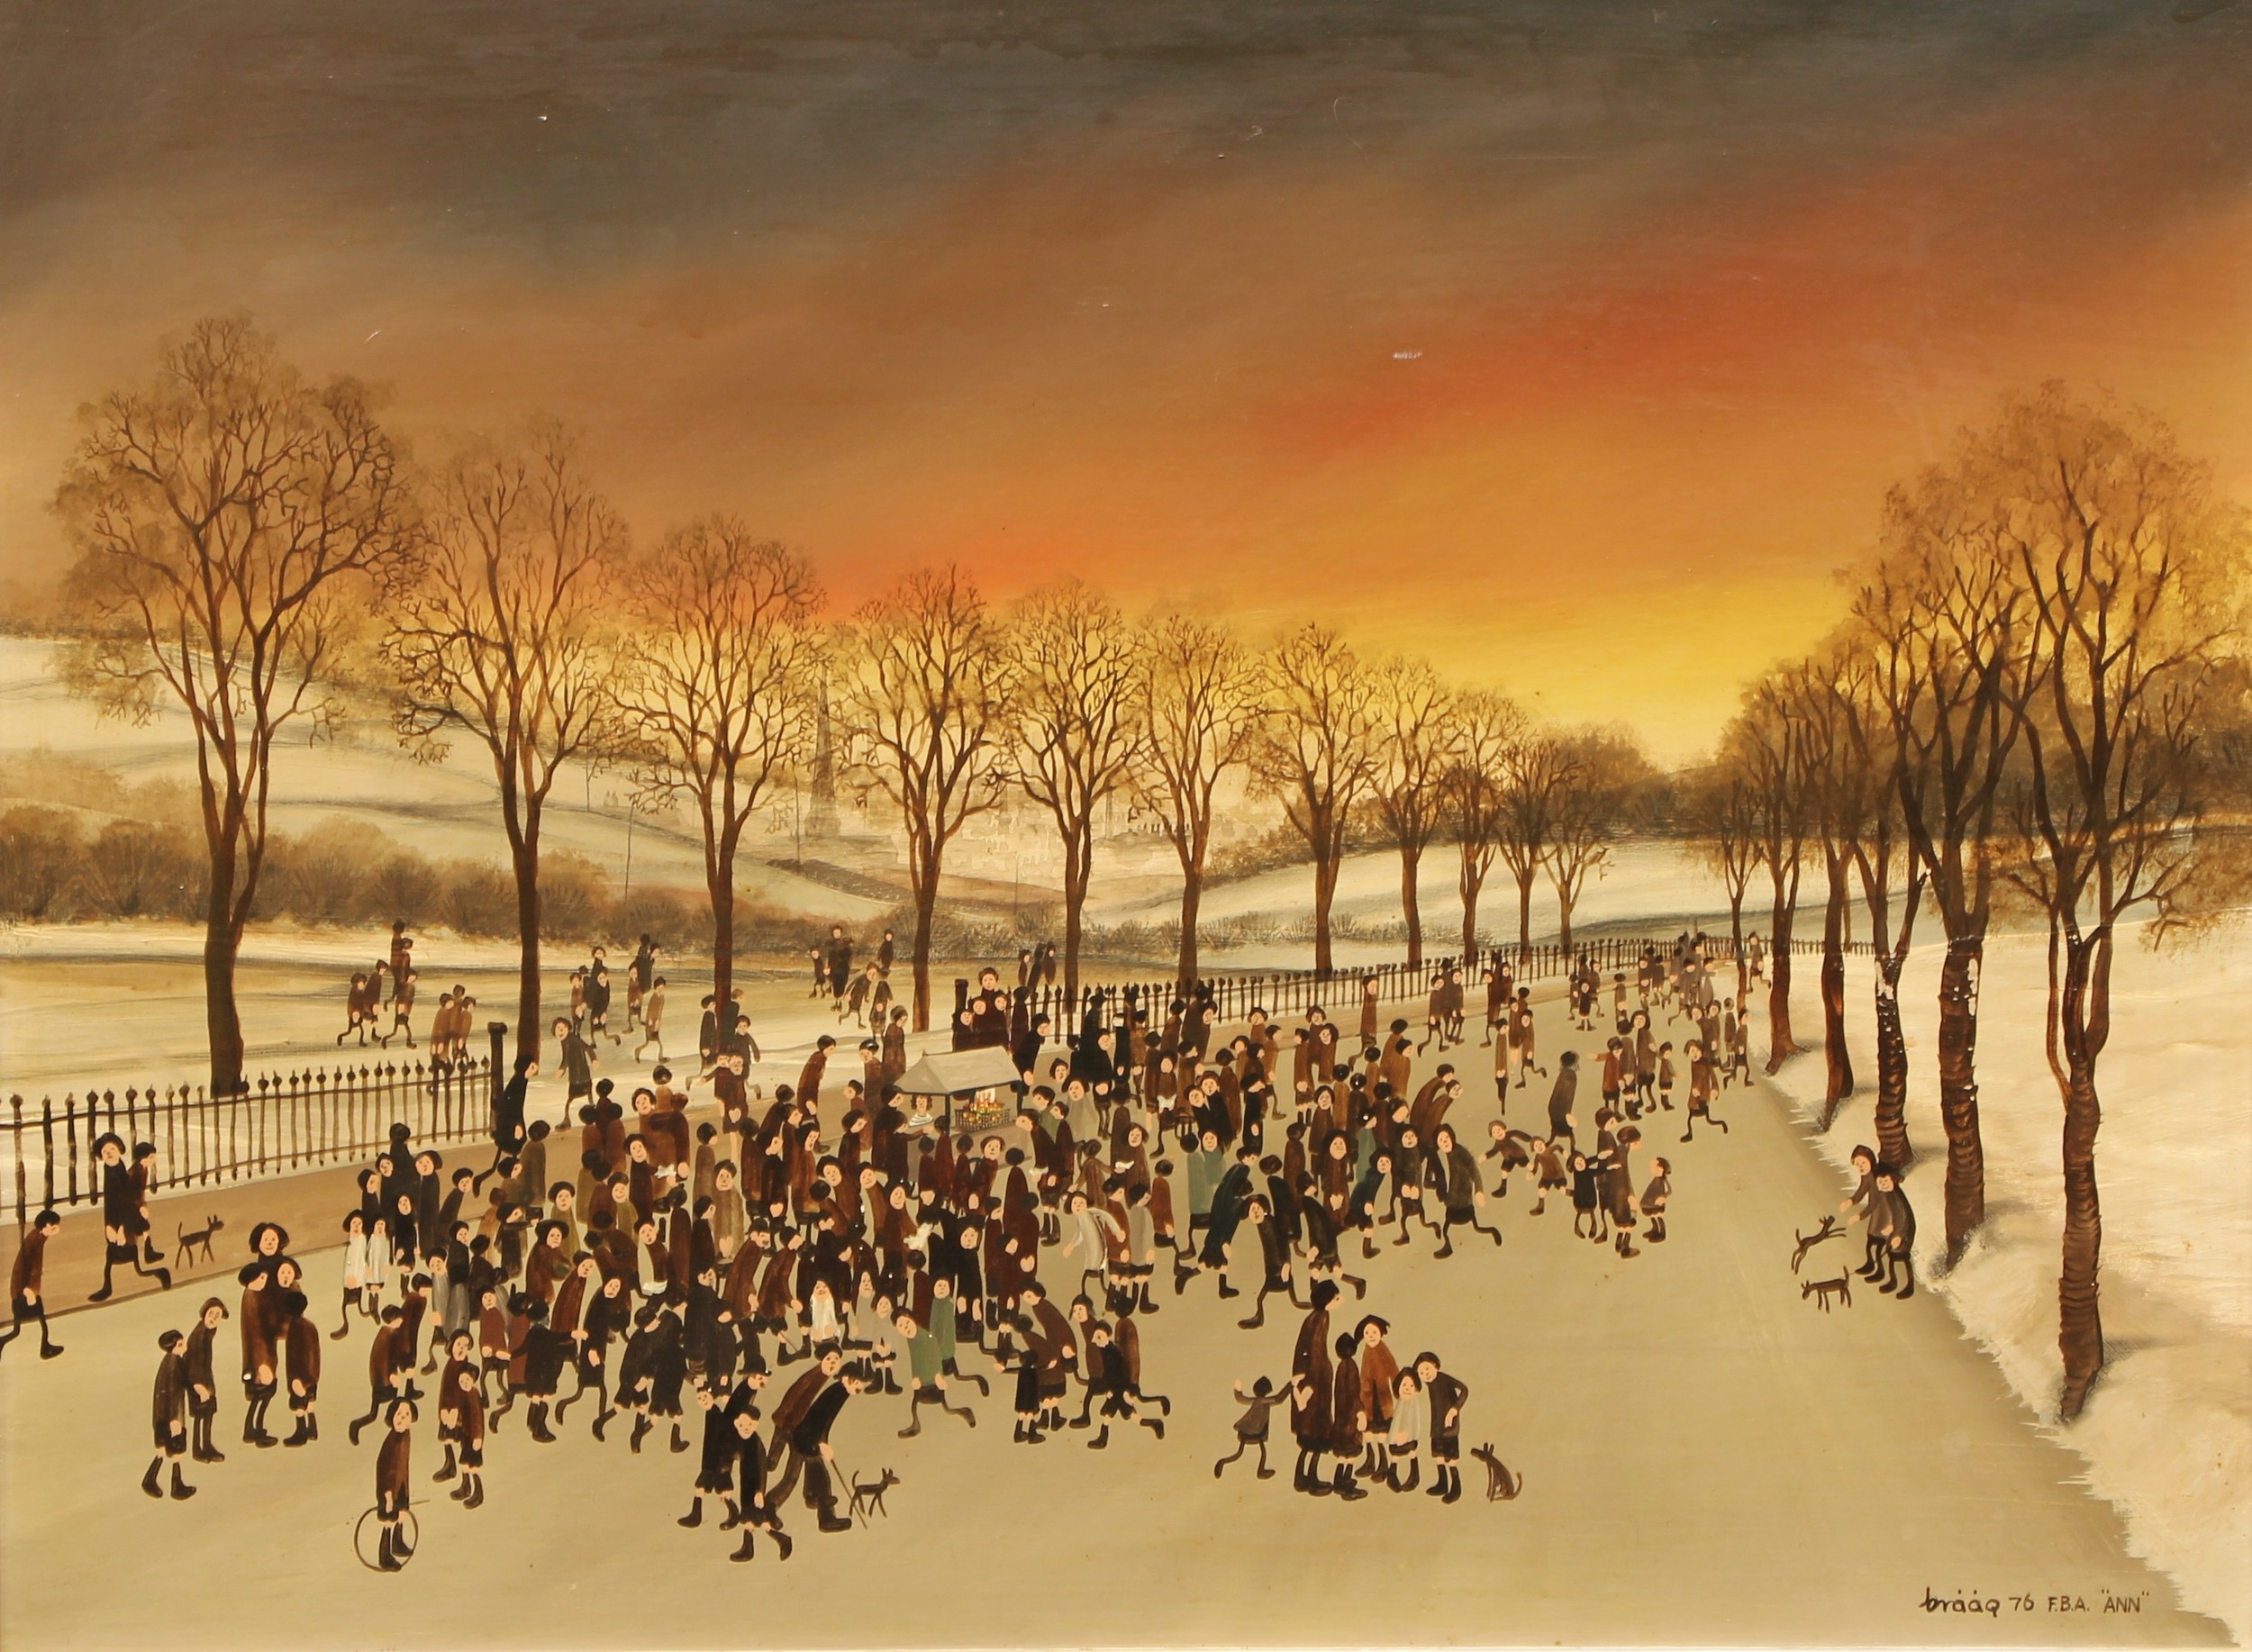 Braaq (Brian Shields) (1951-1997) Bustling Park signed, inscribed and dated 'braaq 76 F.B.A. “